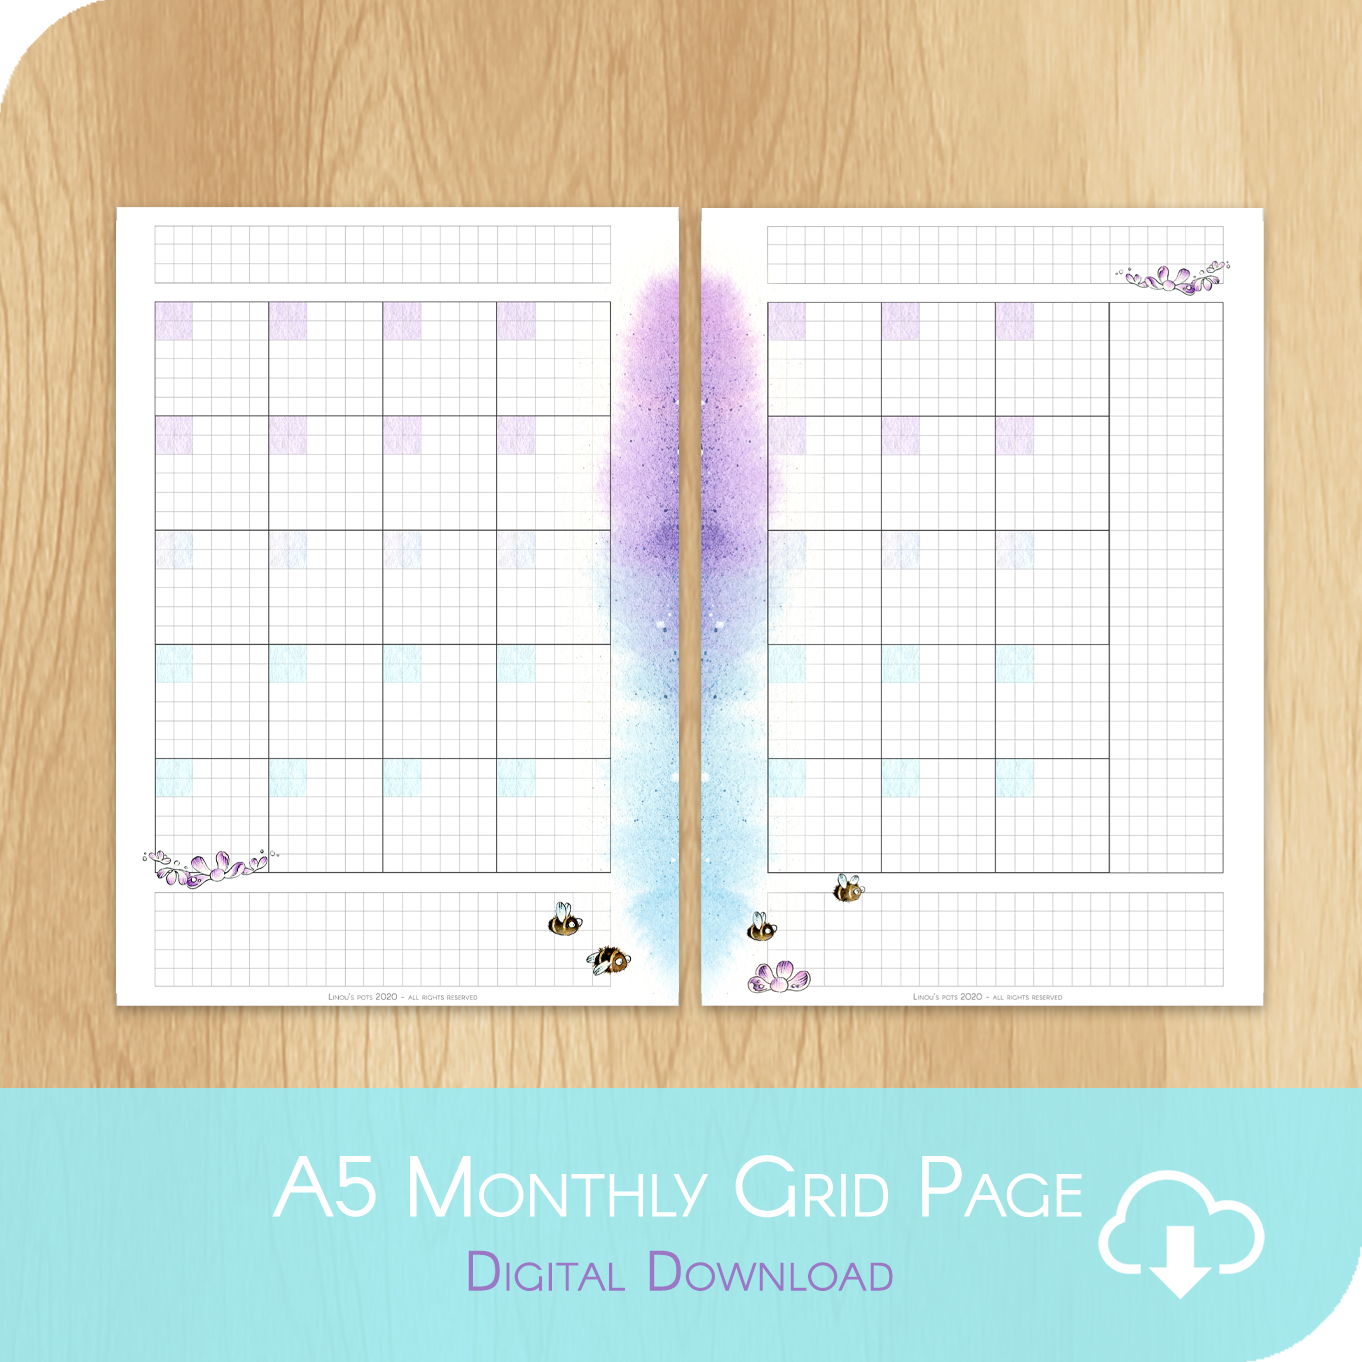 Buzzing In The Rain - Printable A5 Grid Undated Monthly - 1 Month on 2 Pages